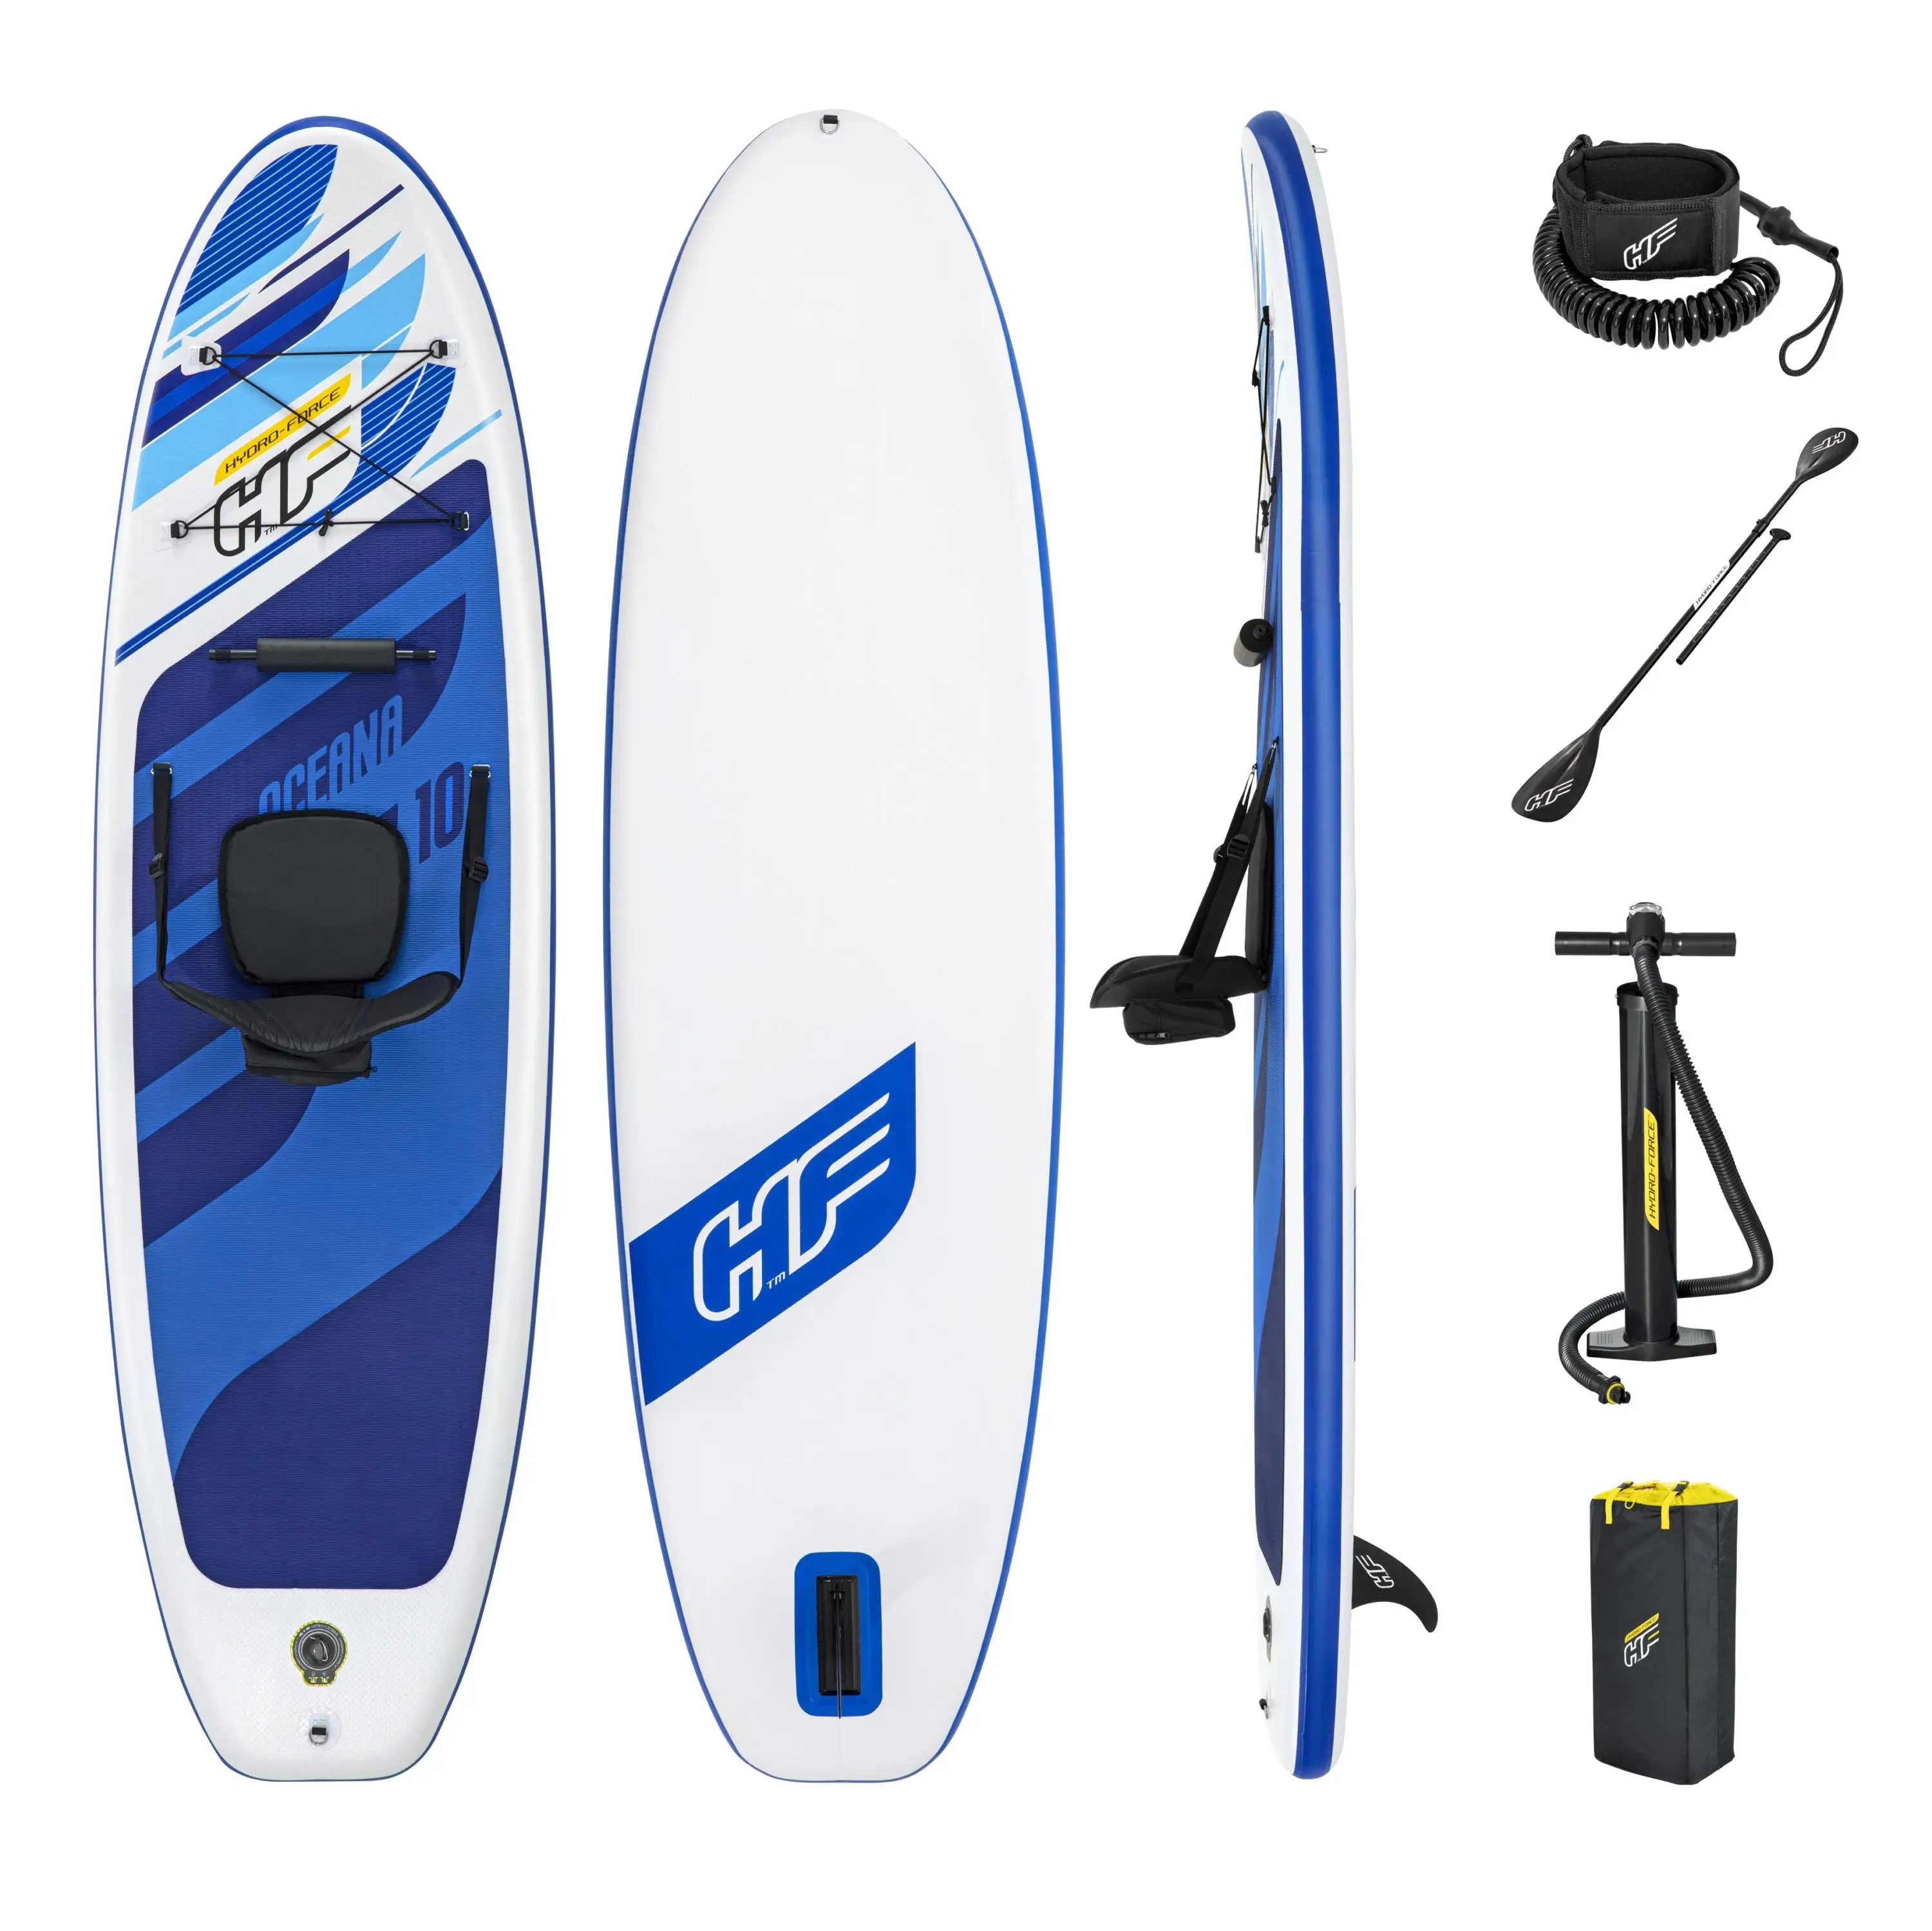 

Original Bestway 65350 3.05m Hydro-Force Aqua Cruise Tech Inflatable Stand-Up Paddleboard Set Floating Water Pad